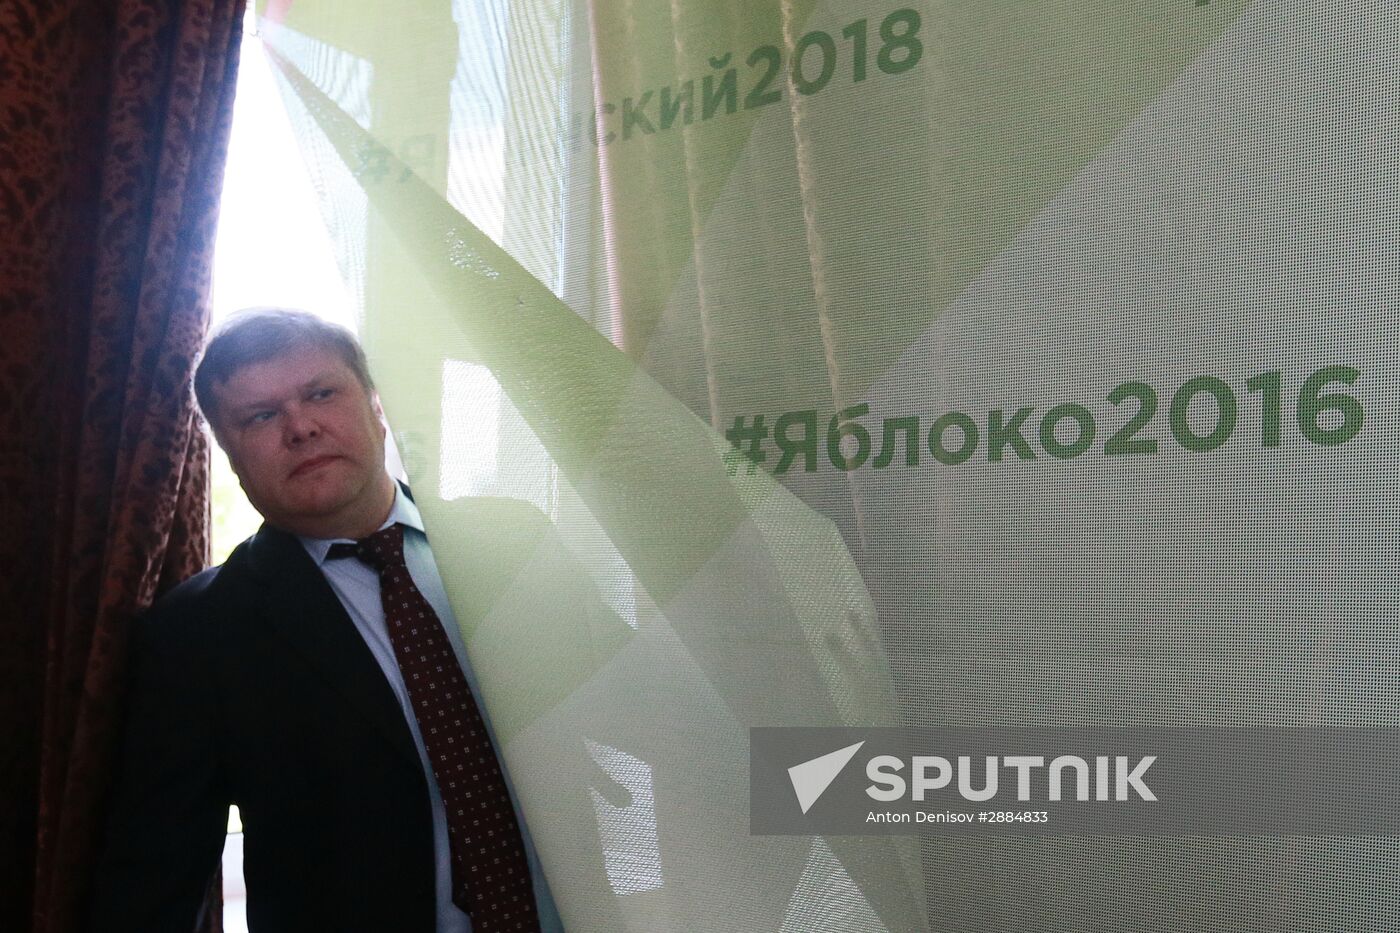 Pre-election convention of Yabloko Party